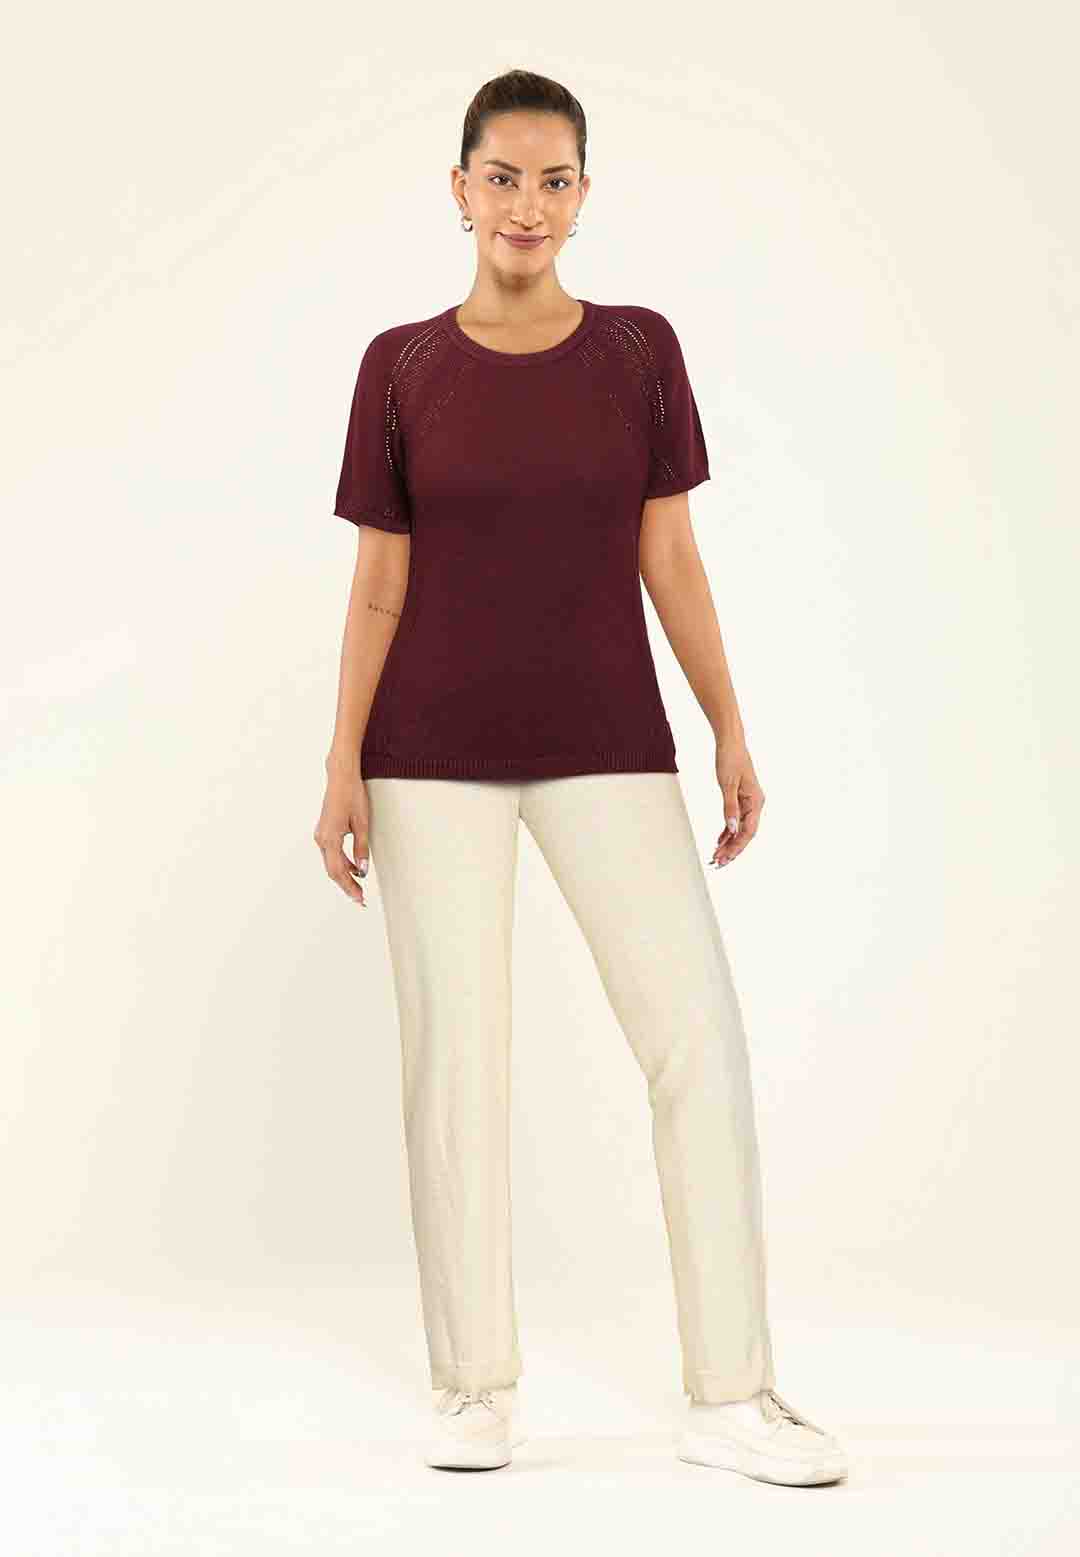 The At-Ease Cotton Knit Pointelle Top